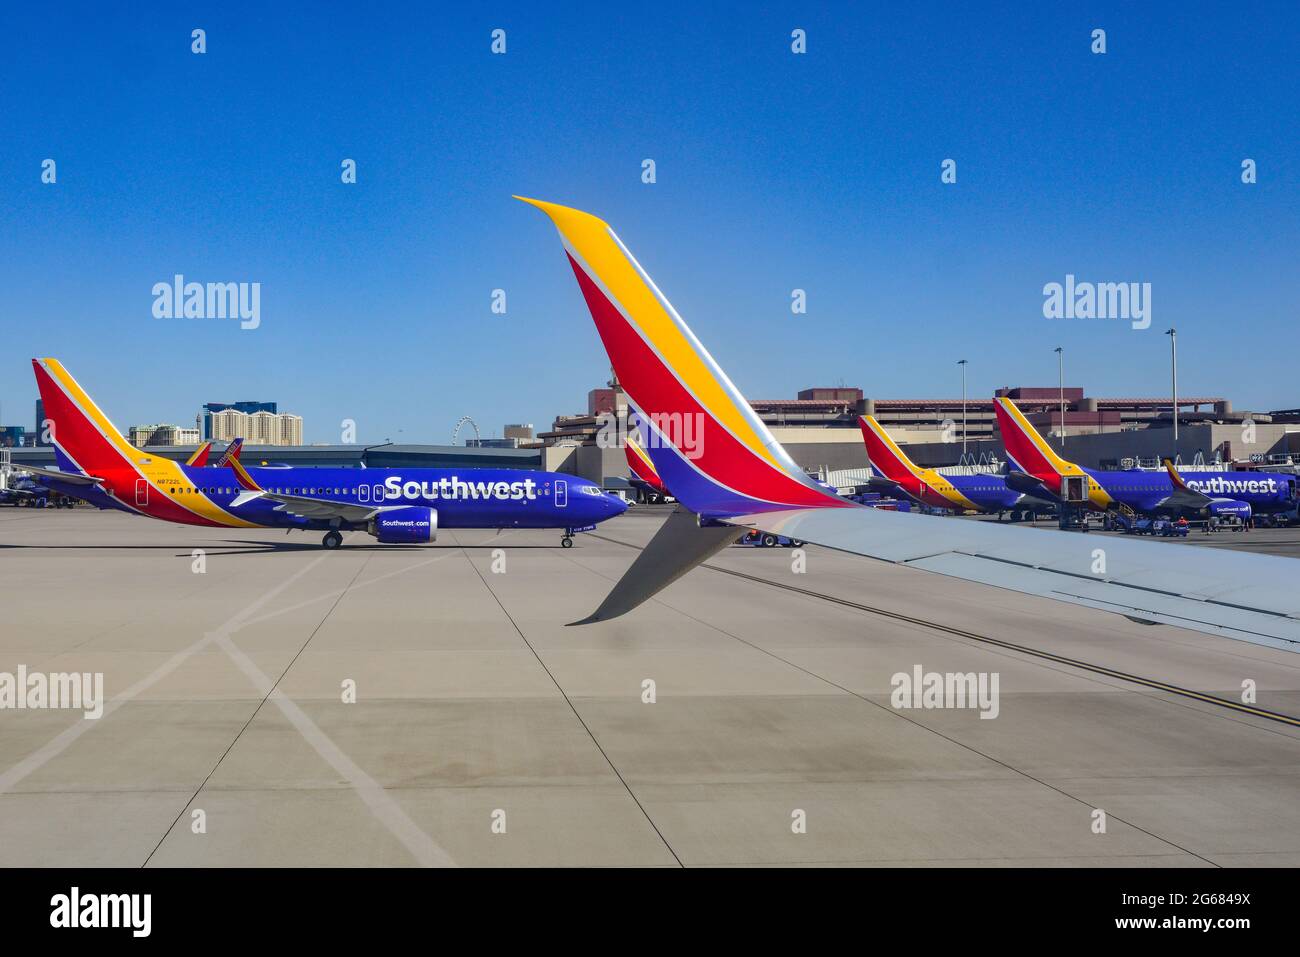 A formation of Southwest Airlines planes at terminal gates at Las Vegas McCarran International Airport in Las Vegas, NV, with casinos in the distance Stock Photo